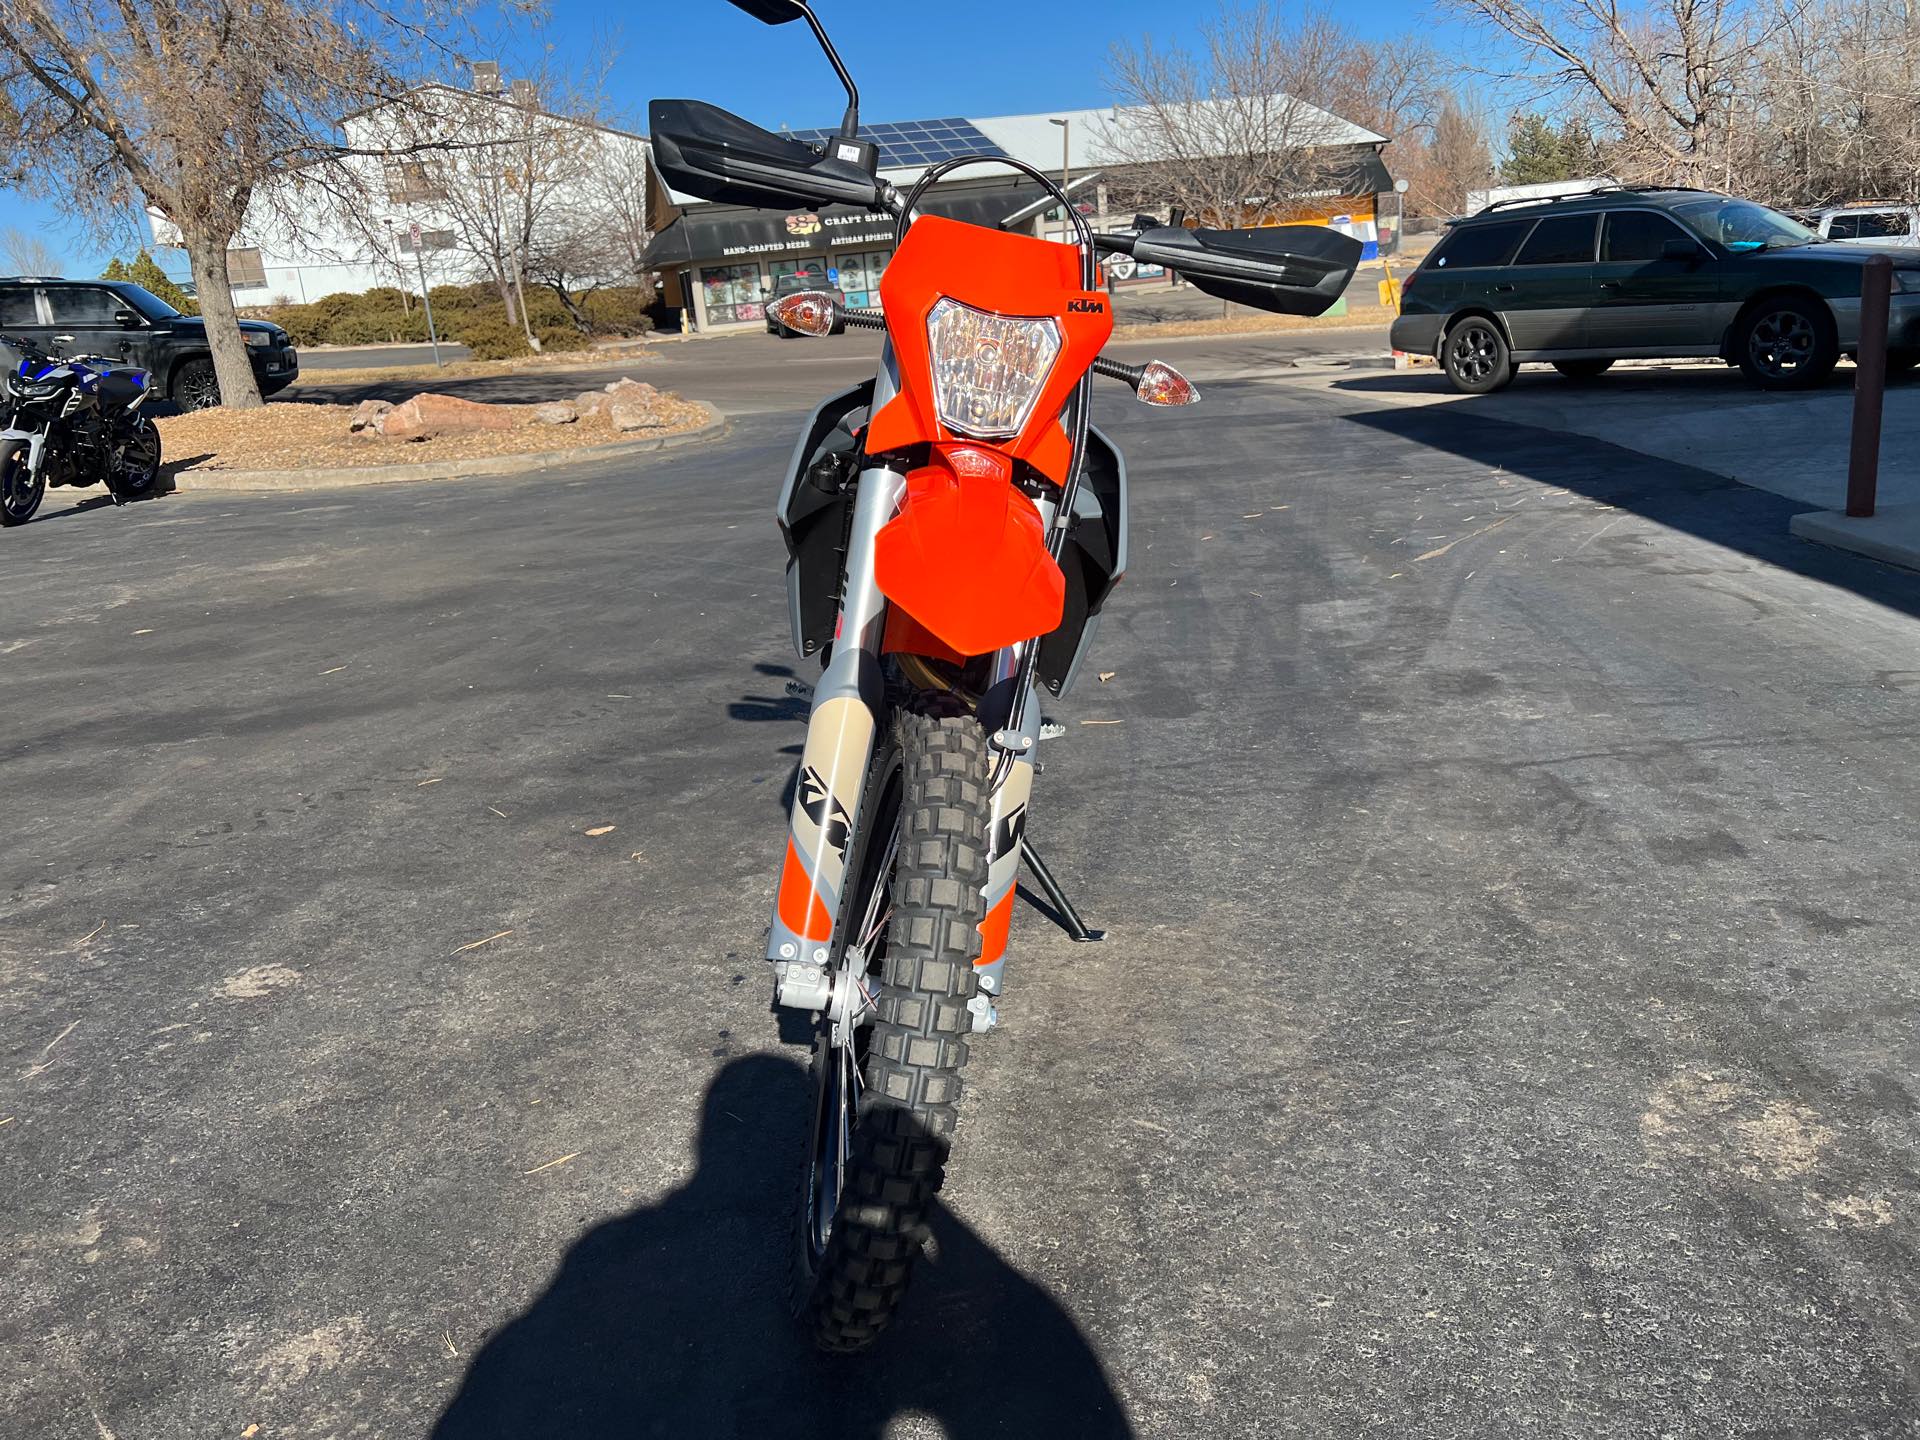 2023 KTM 690 Enduro R at Aces Motorcycles - Fort Collins